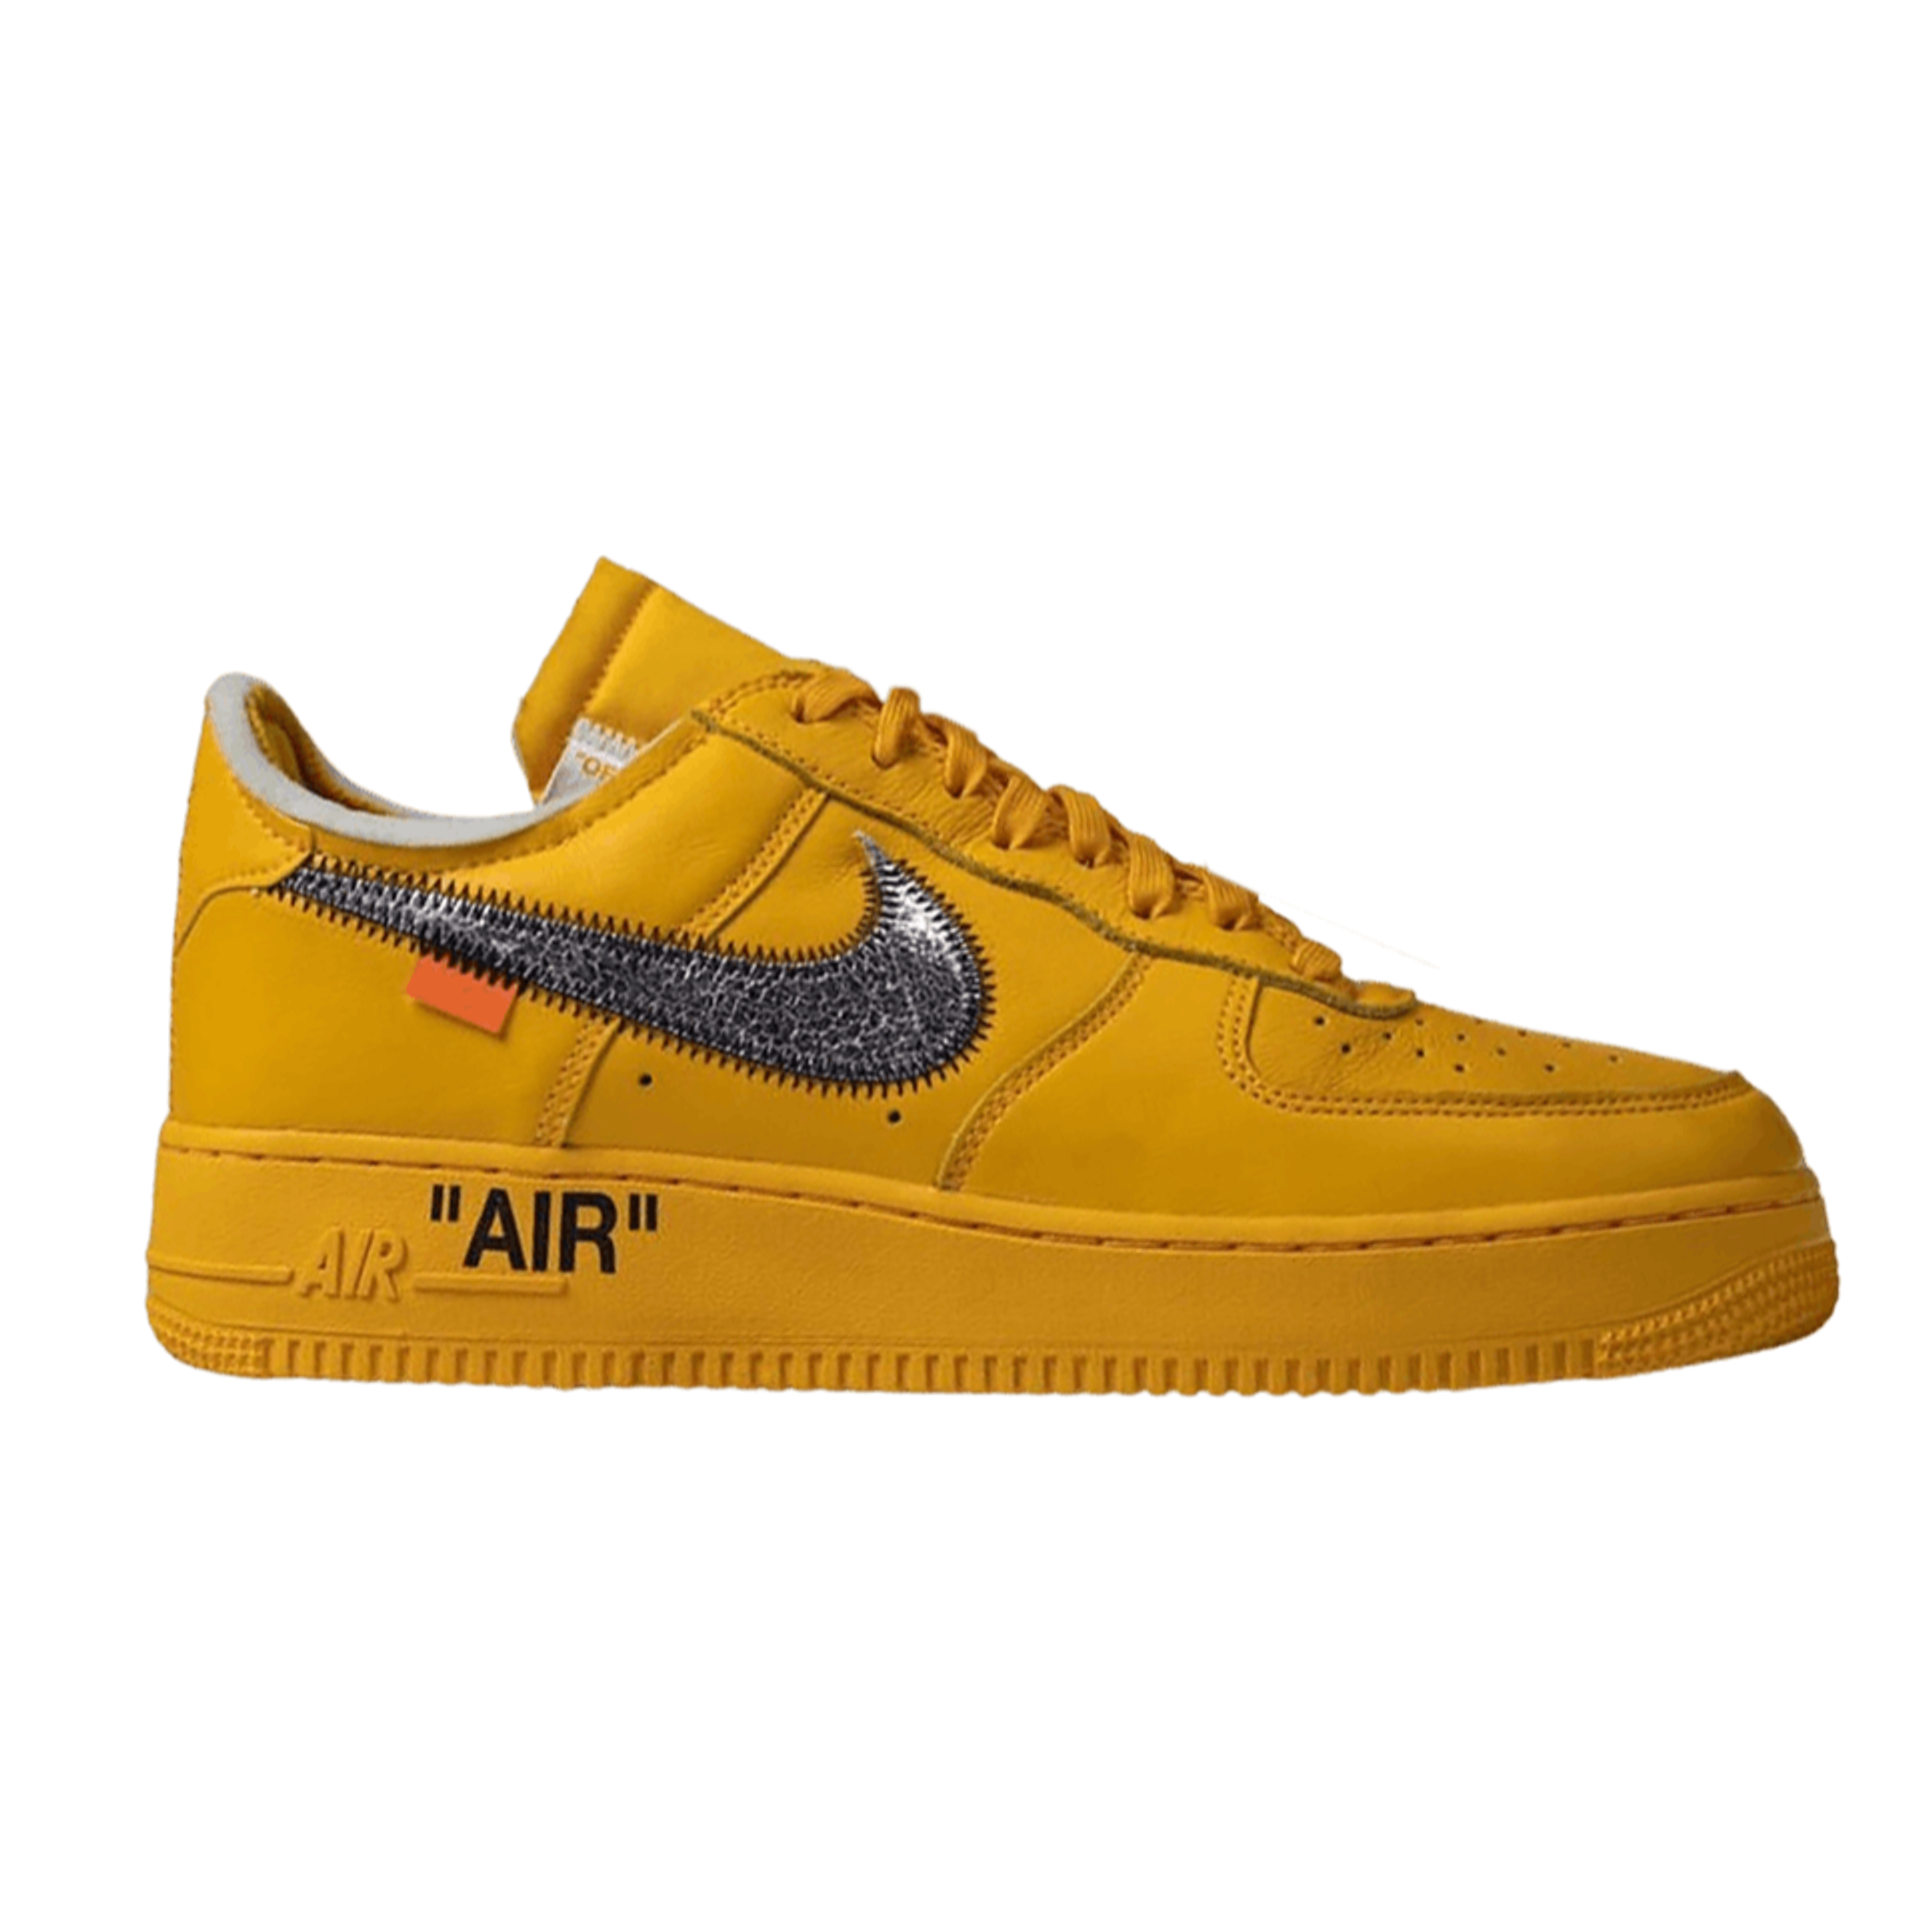 Nike OffWhite x Air Force 1 Low 'University Gold' DD1876 700 Ox Street